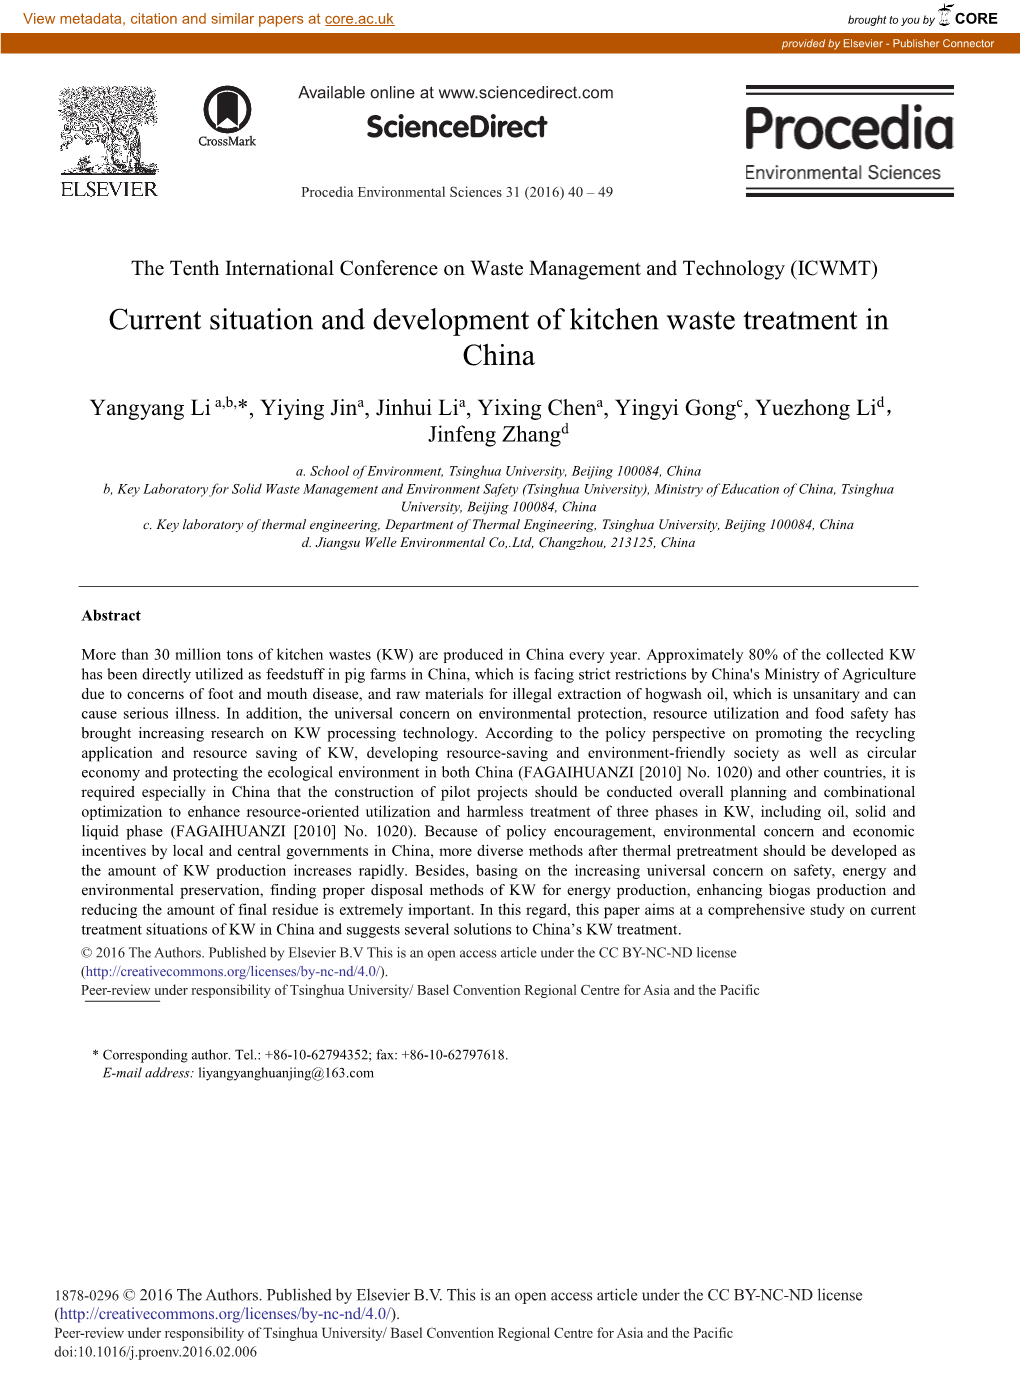 Current Situation and Development of Kitchen Waste Treatment in China